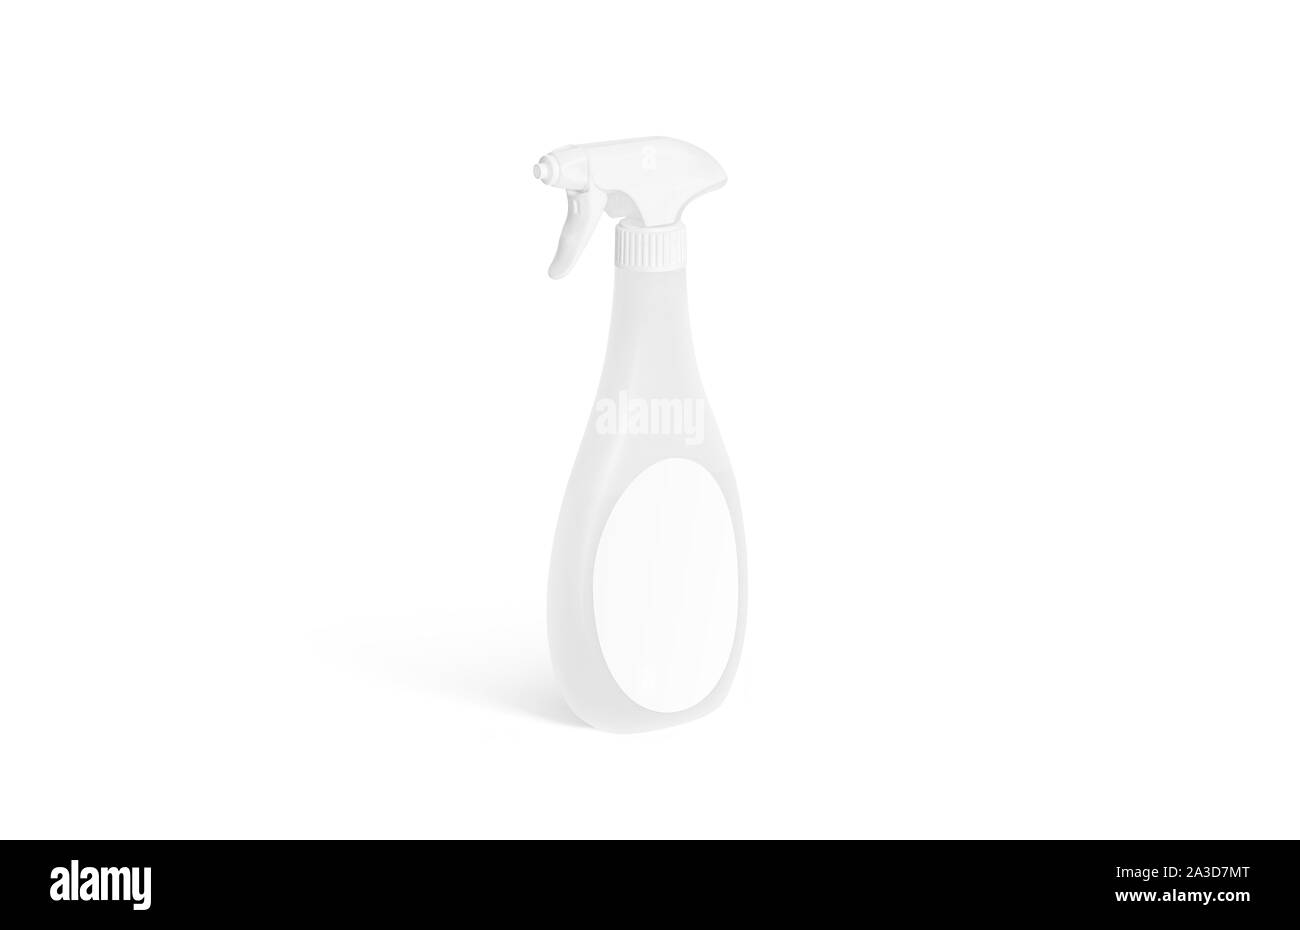 Blank white spray bottle mockup isolated, side view Stock Photo